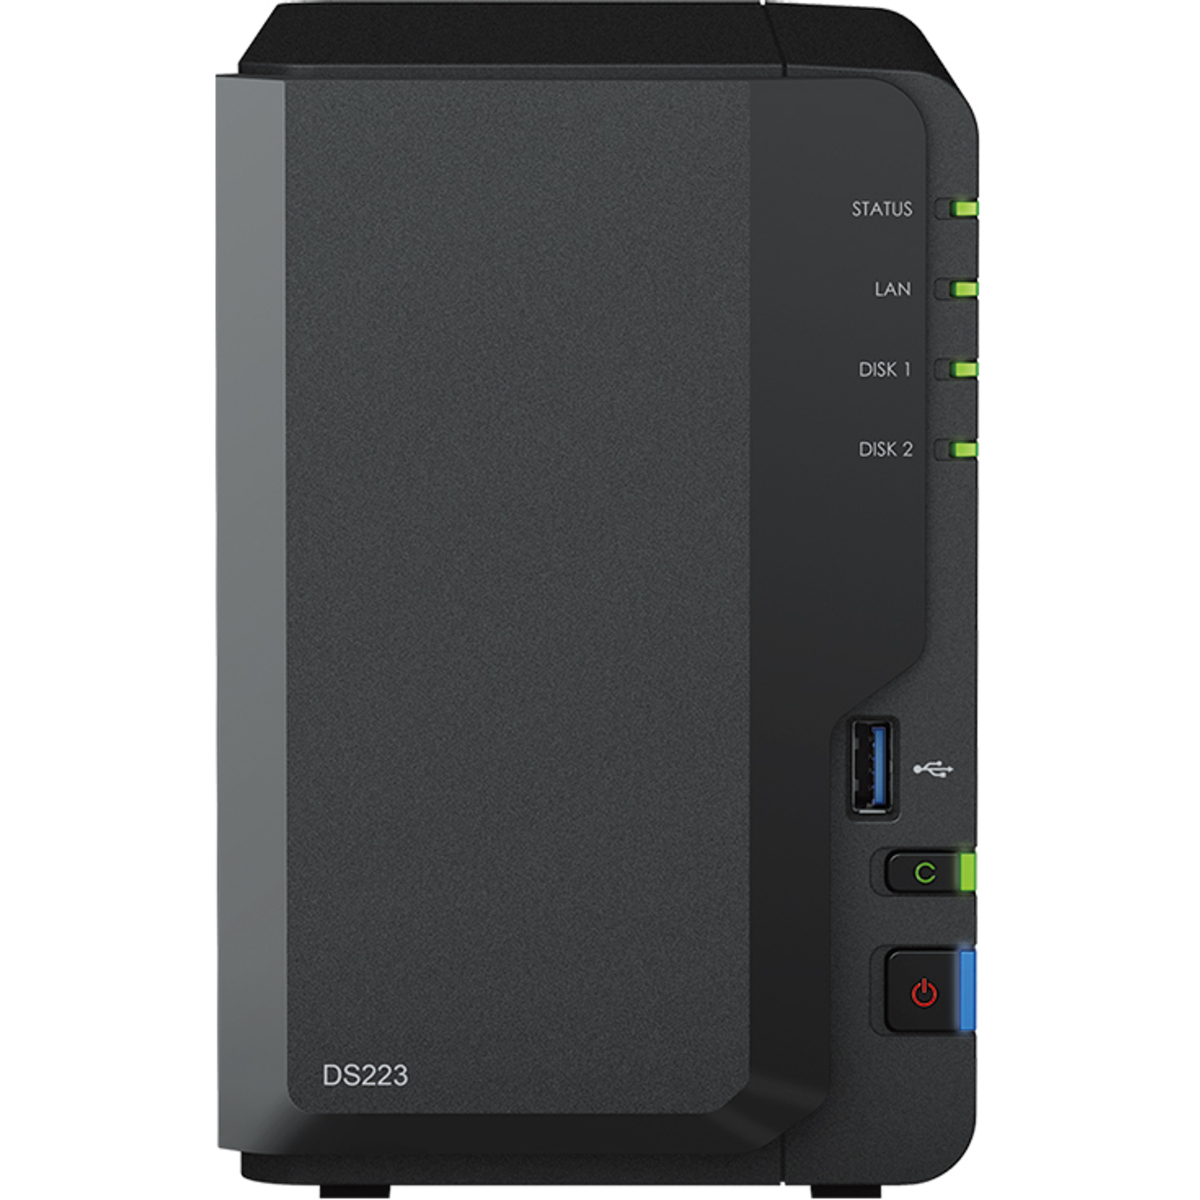 Synology DiskStation DS223 6tb 2-Bay Desktop Personal / Basic Home / Small Office NAS - Network Attached Storage Device 1x6tb Seagate BarraCuda ST6000DM003 3.5 5400rpm SATA 6Gb/s HDD CONSUMER Class Drives Installed - Burn-In Tested DiskStation DS223